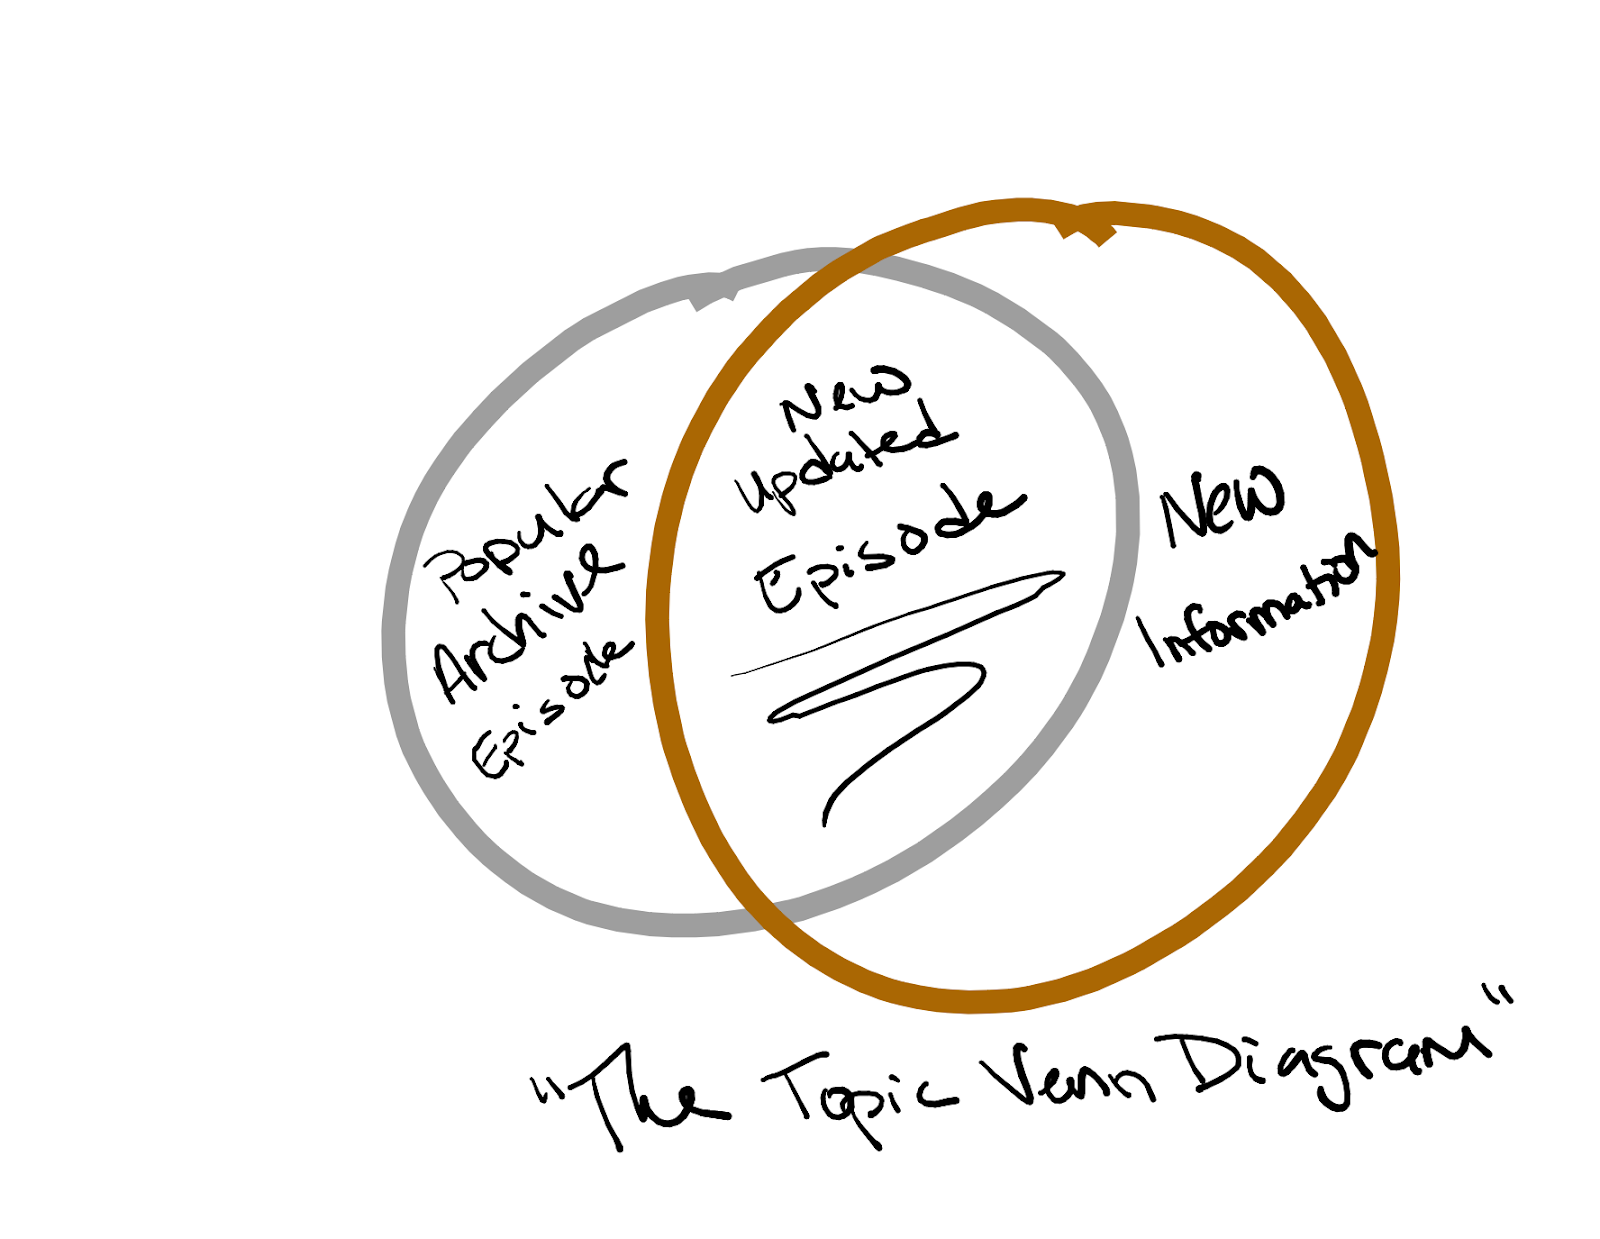 A venn diagram. One circle, drawn in silver, has the caption, "Popular archive episode." The other circle, drawn in gold, has the caption, "New information." In their intersection is the caption "New updated episode." The image overall has the caption, "The Topic Venn Diagram."